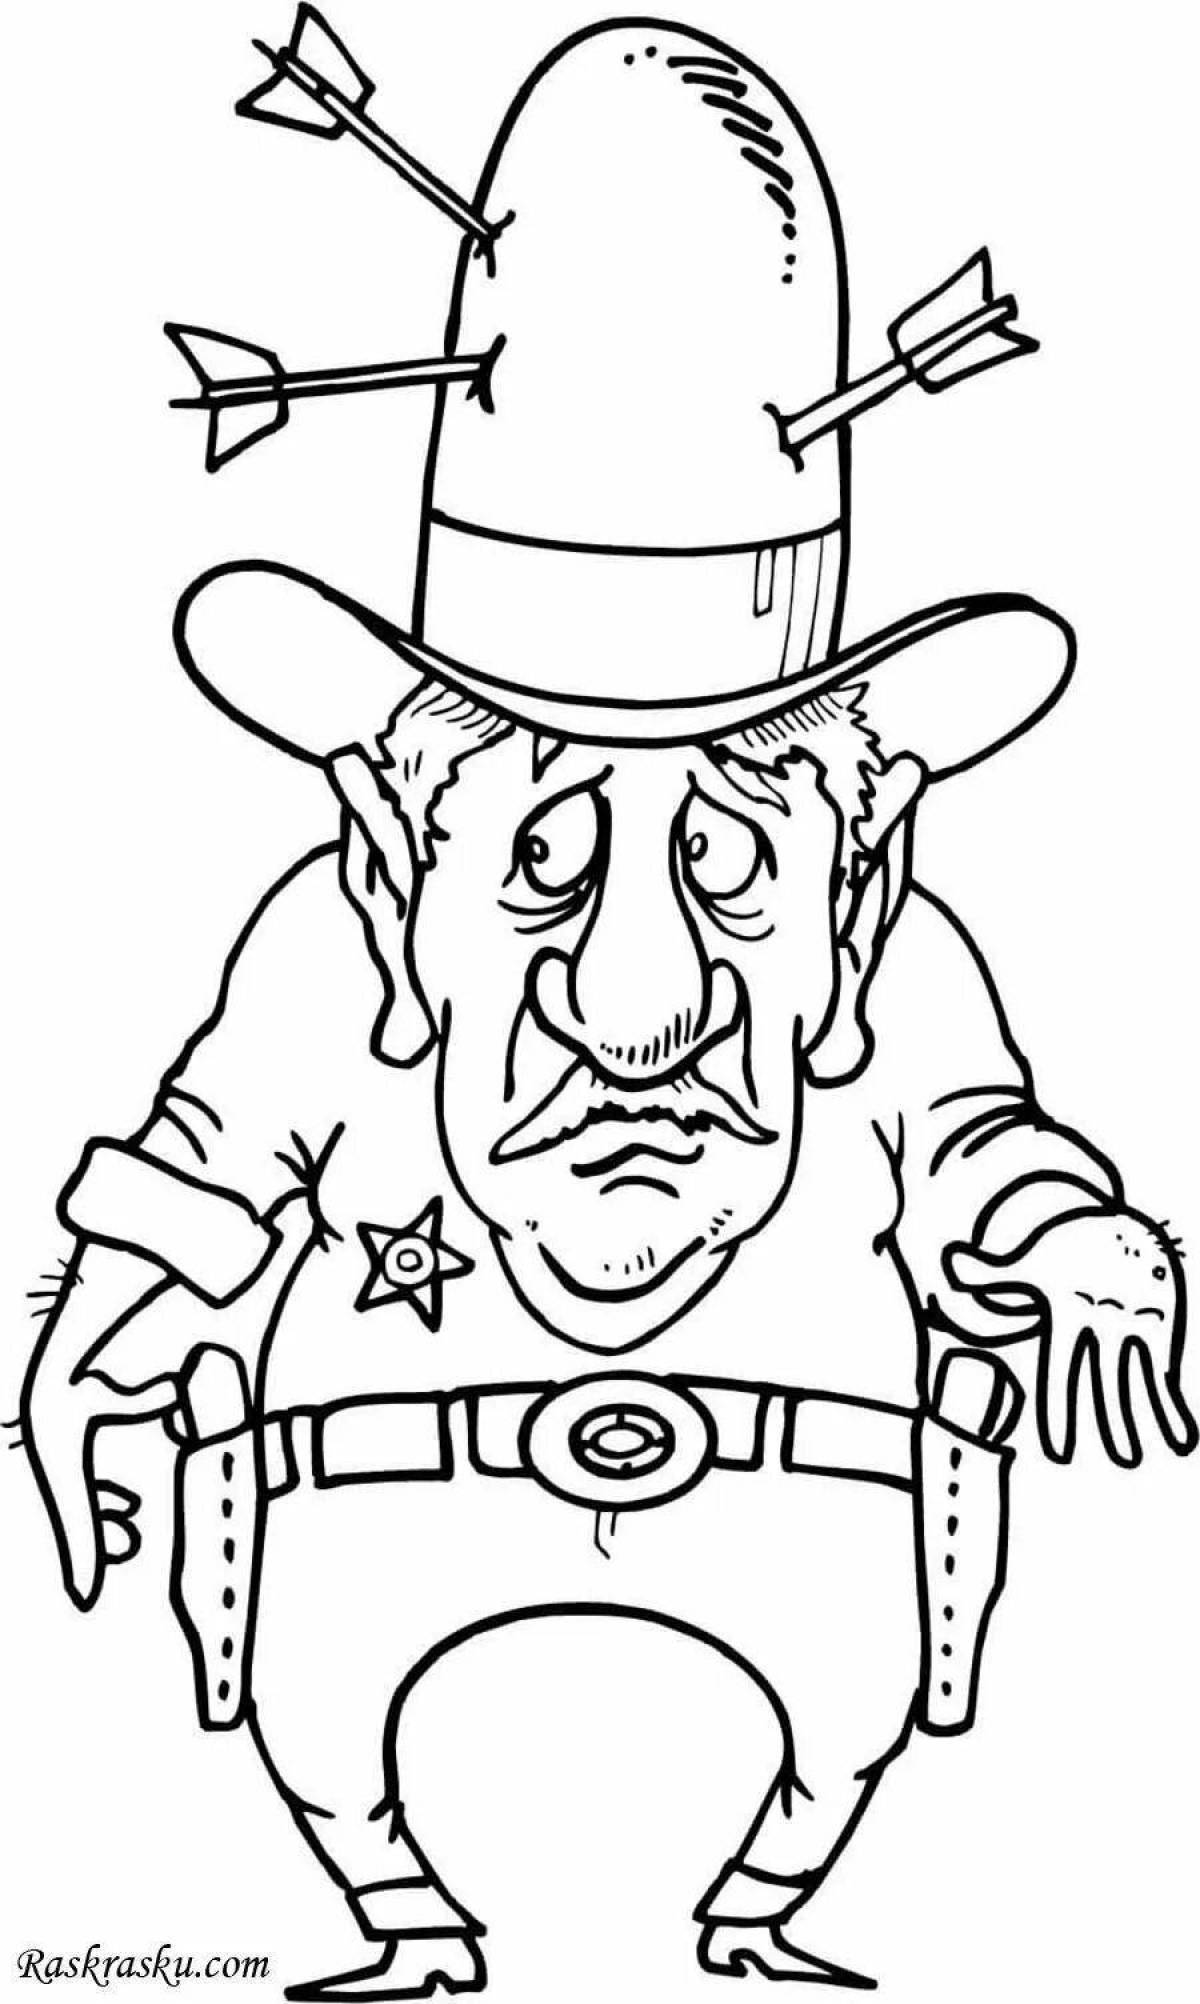 Colorful sheriff coloring page